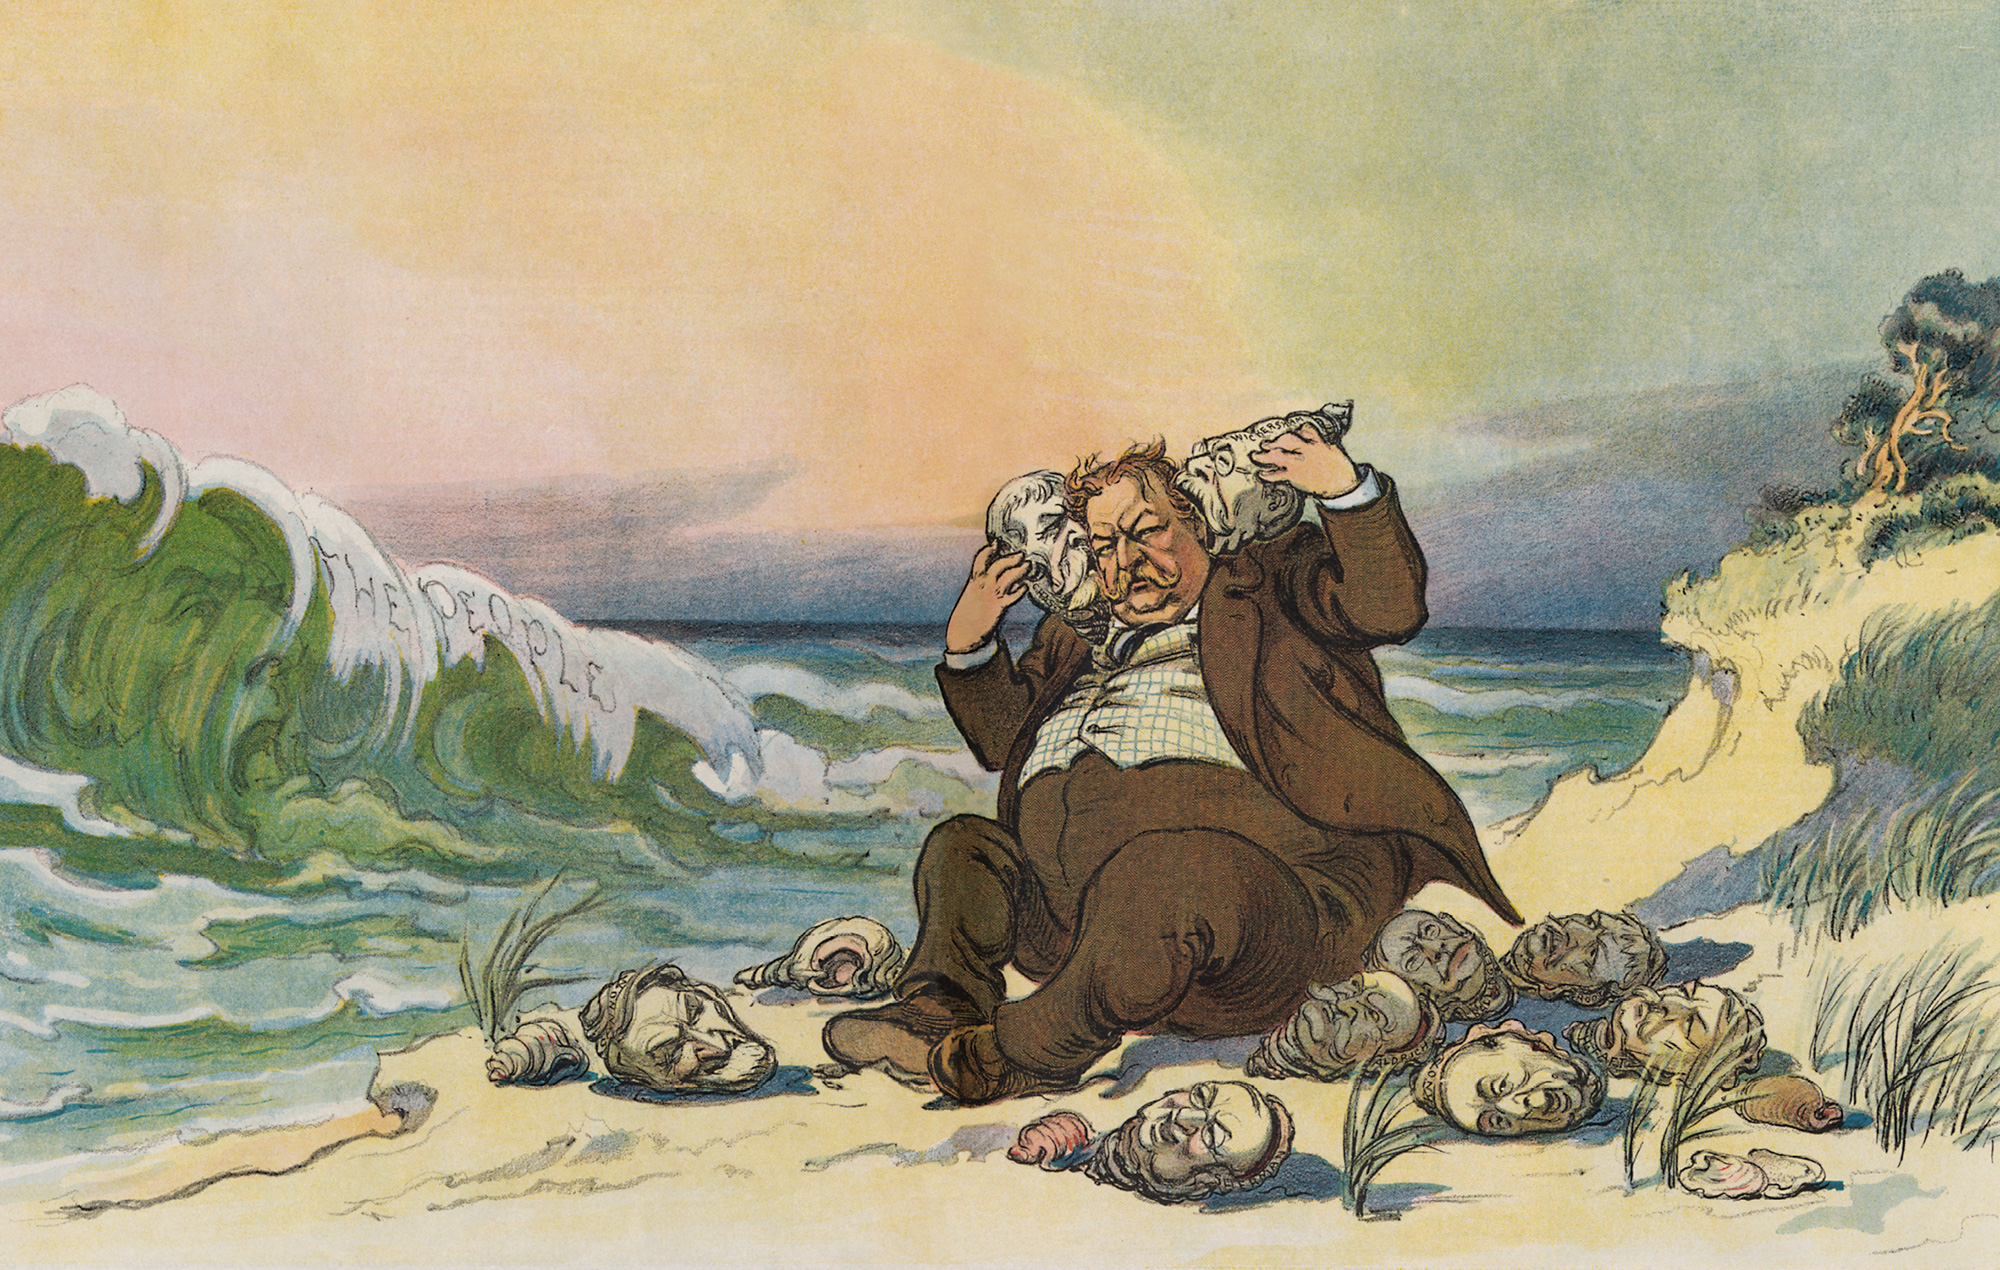 A political cartoon from nineteen ten depicting President Taft listening to various seashells representing prominent political figures rather than to the unmediated voice of “the people,” symbolized by the ocean. The accompanying caption read: “Shells give a good imitation; but, just for a change, why not listen to the real thing?”